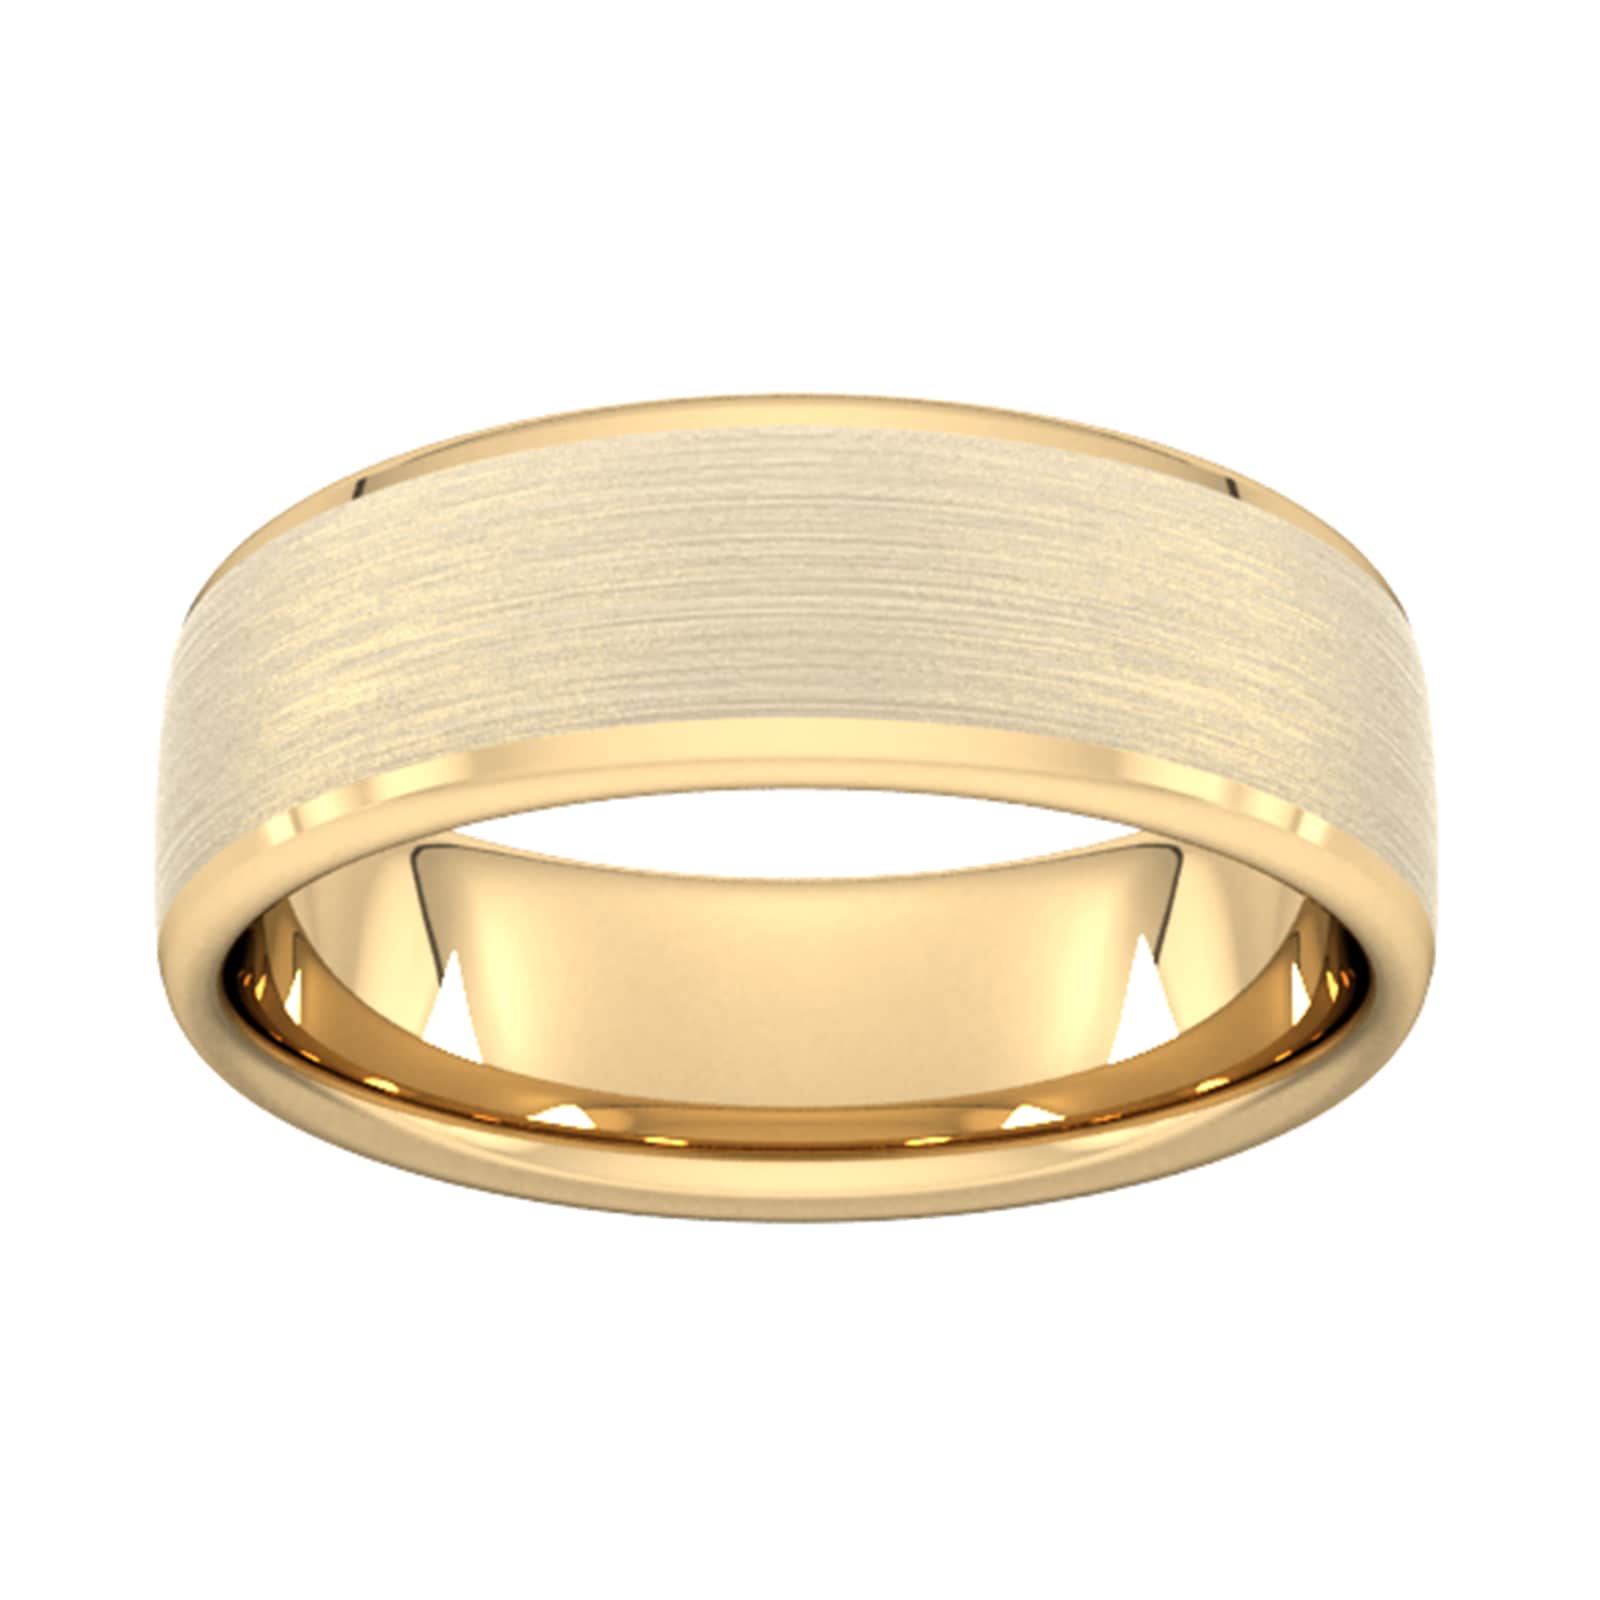 7mm Traditional Court Heavy Polished Chamfered Edges With Matt Centre Wedding Ring In 18 Carat Yellow Gold - Ring Size R